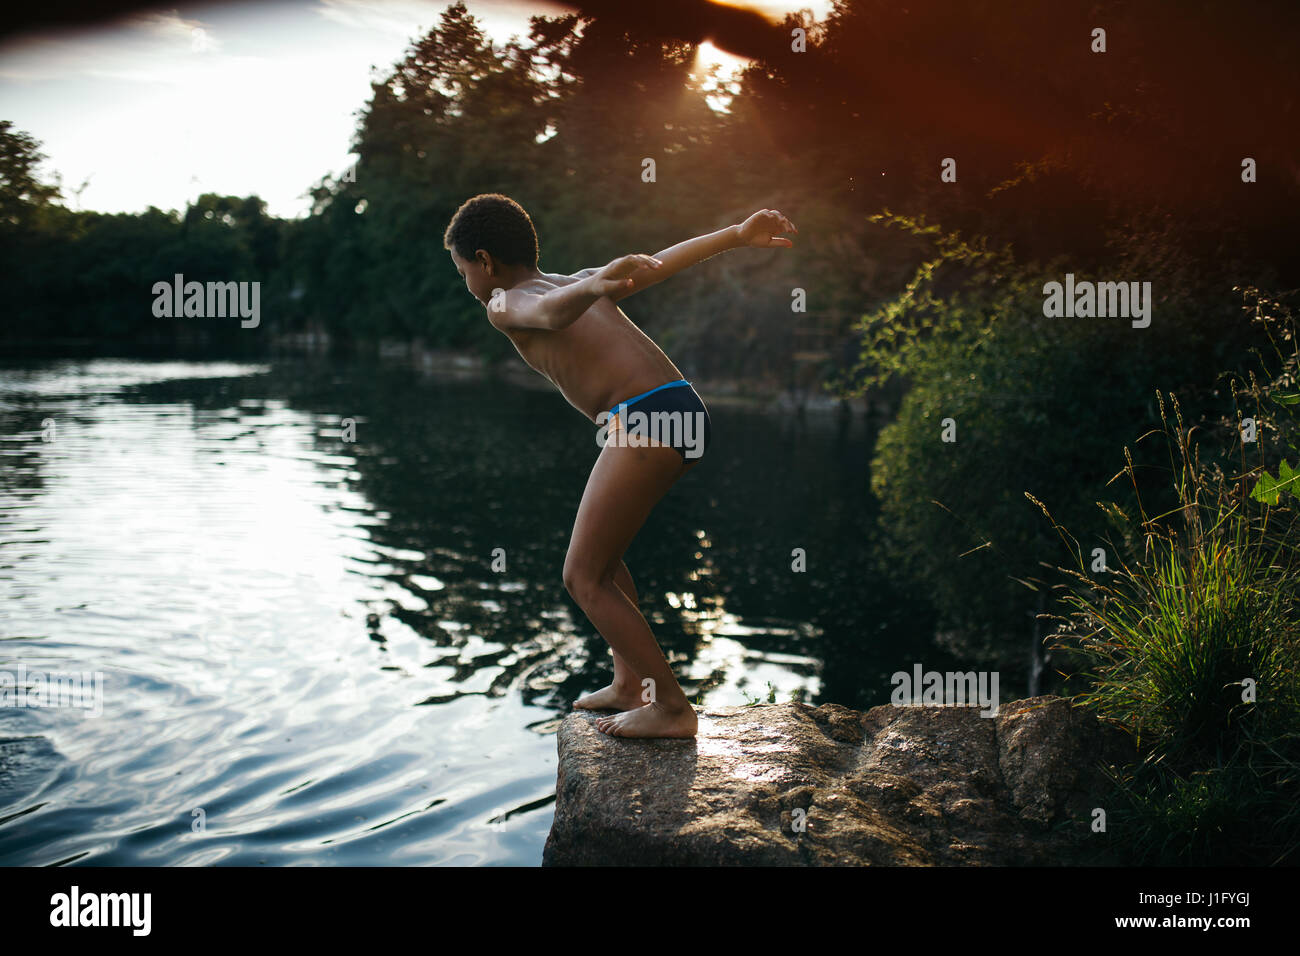 Boy jumping off the cliff into a lake during sunset Stock Photo